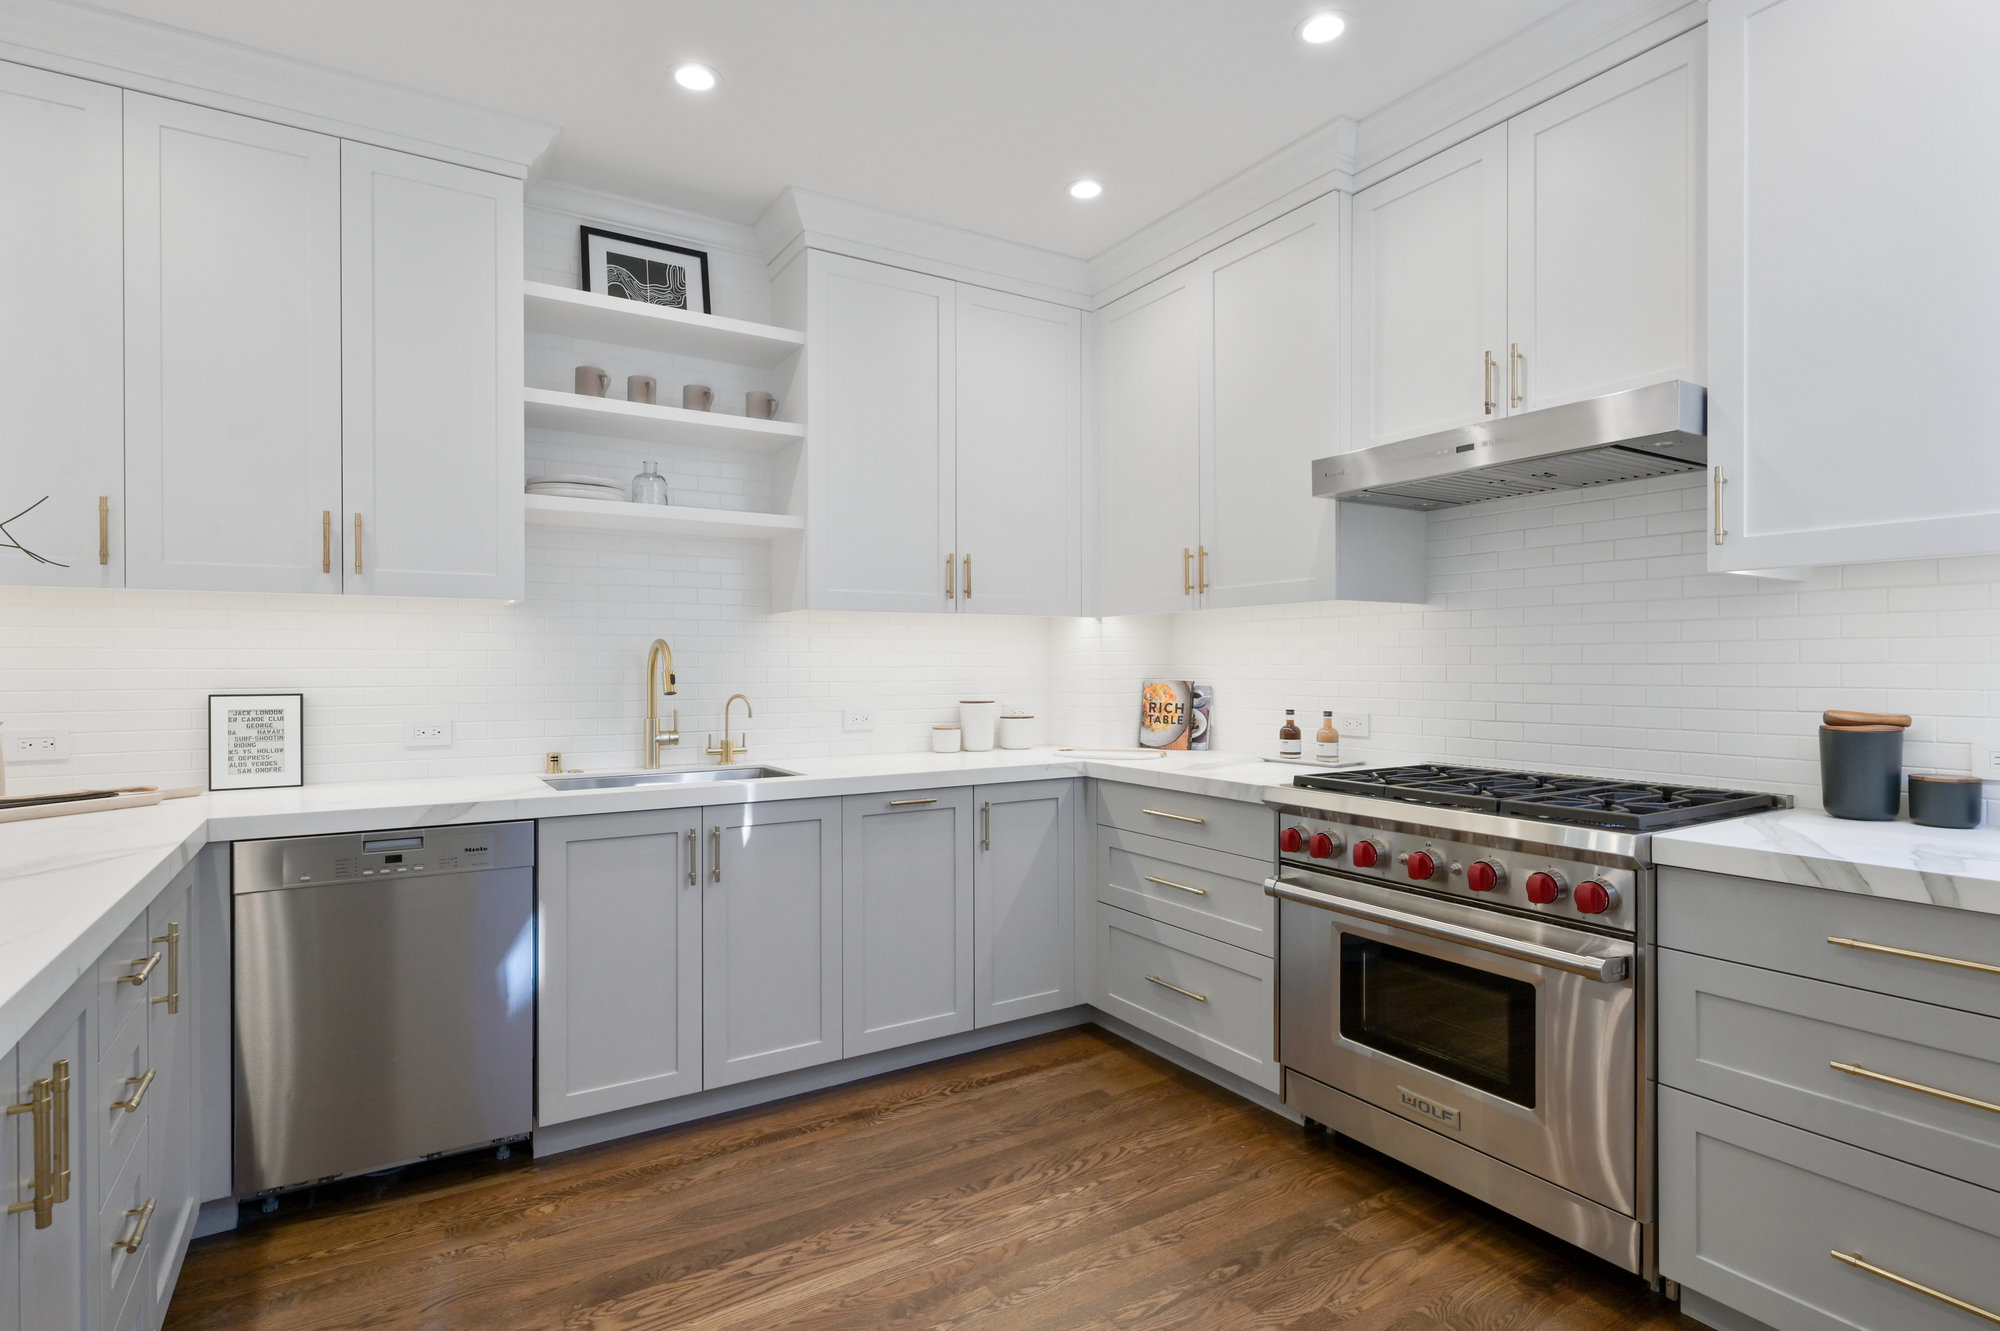 Property Photo: Kitchen view, showing the stainless stove and lux cabinets